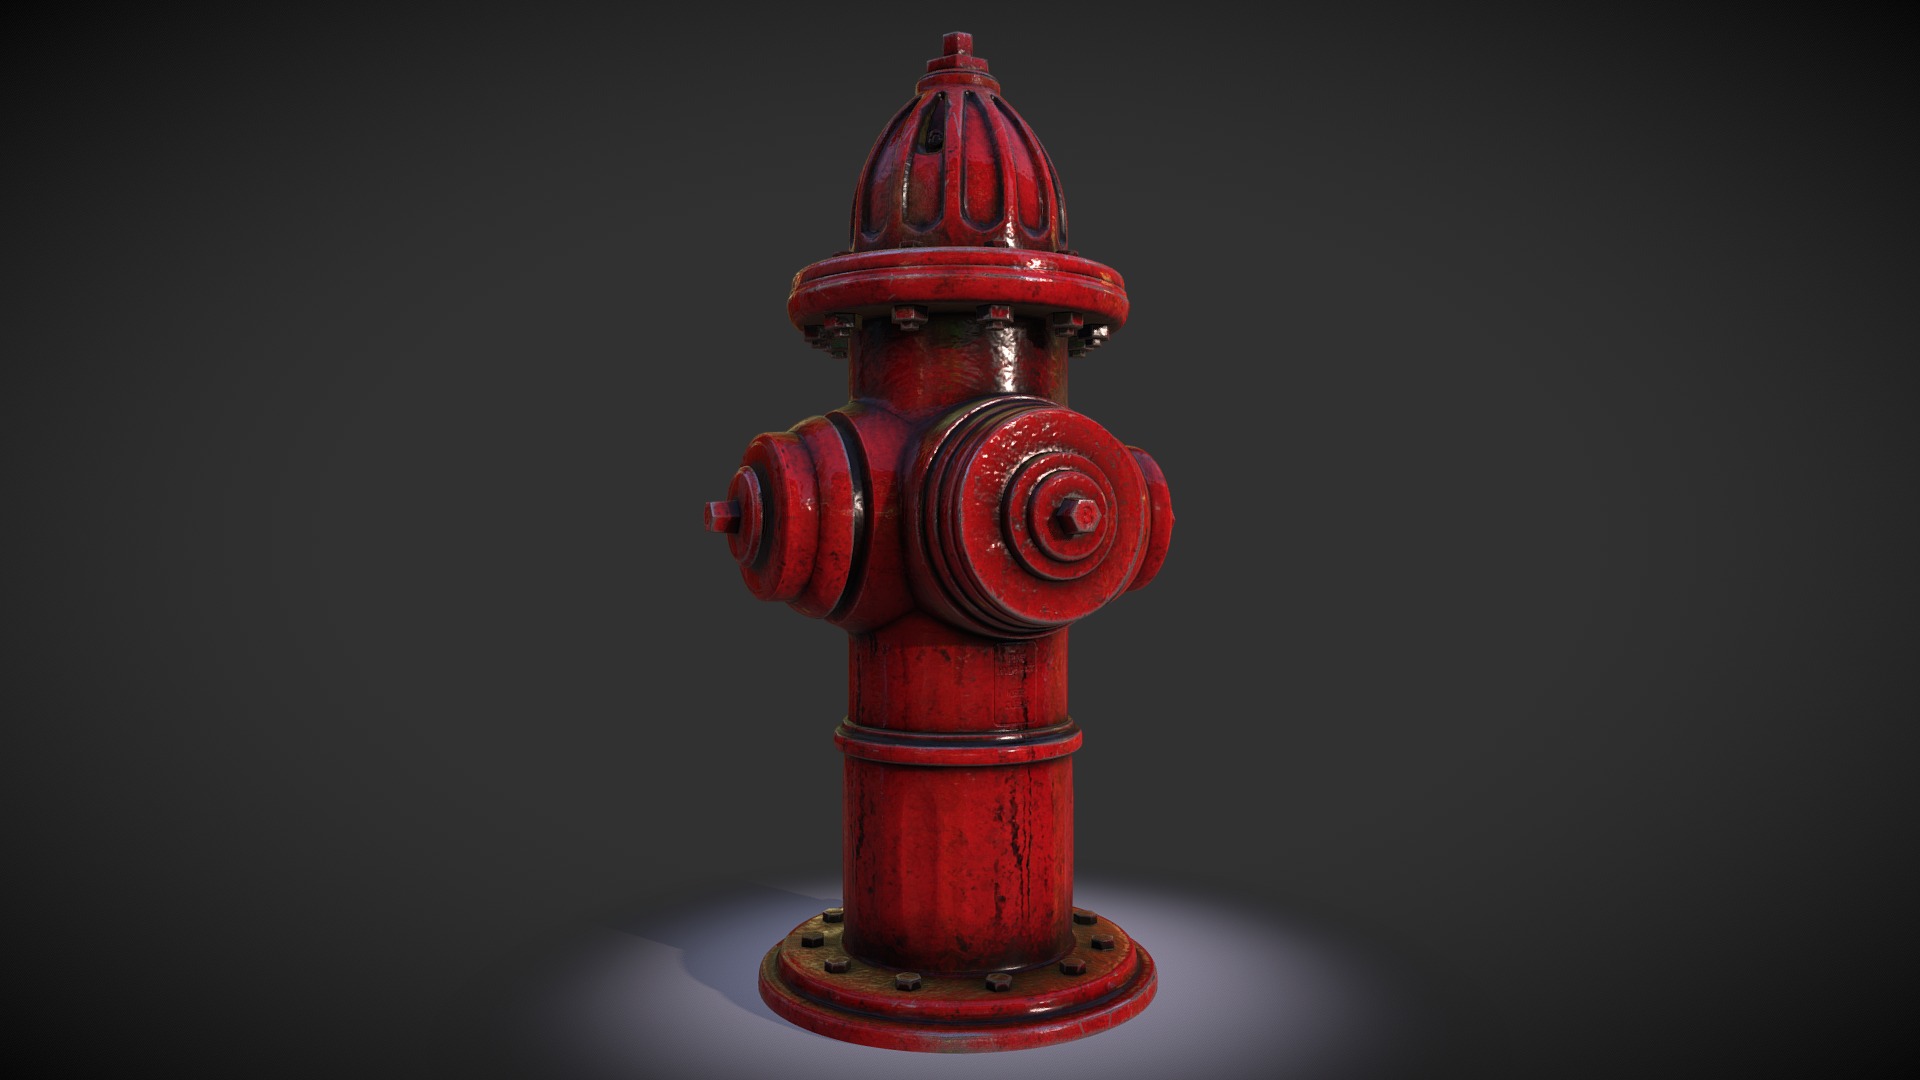 3D model American red fire hydrant - This is a 3D model of the American red fire hydrant. The 3D model is about a red fire hydrant.